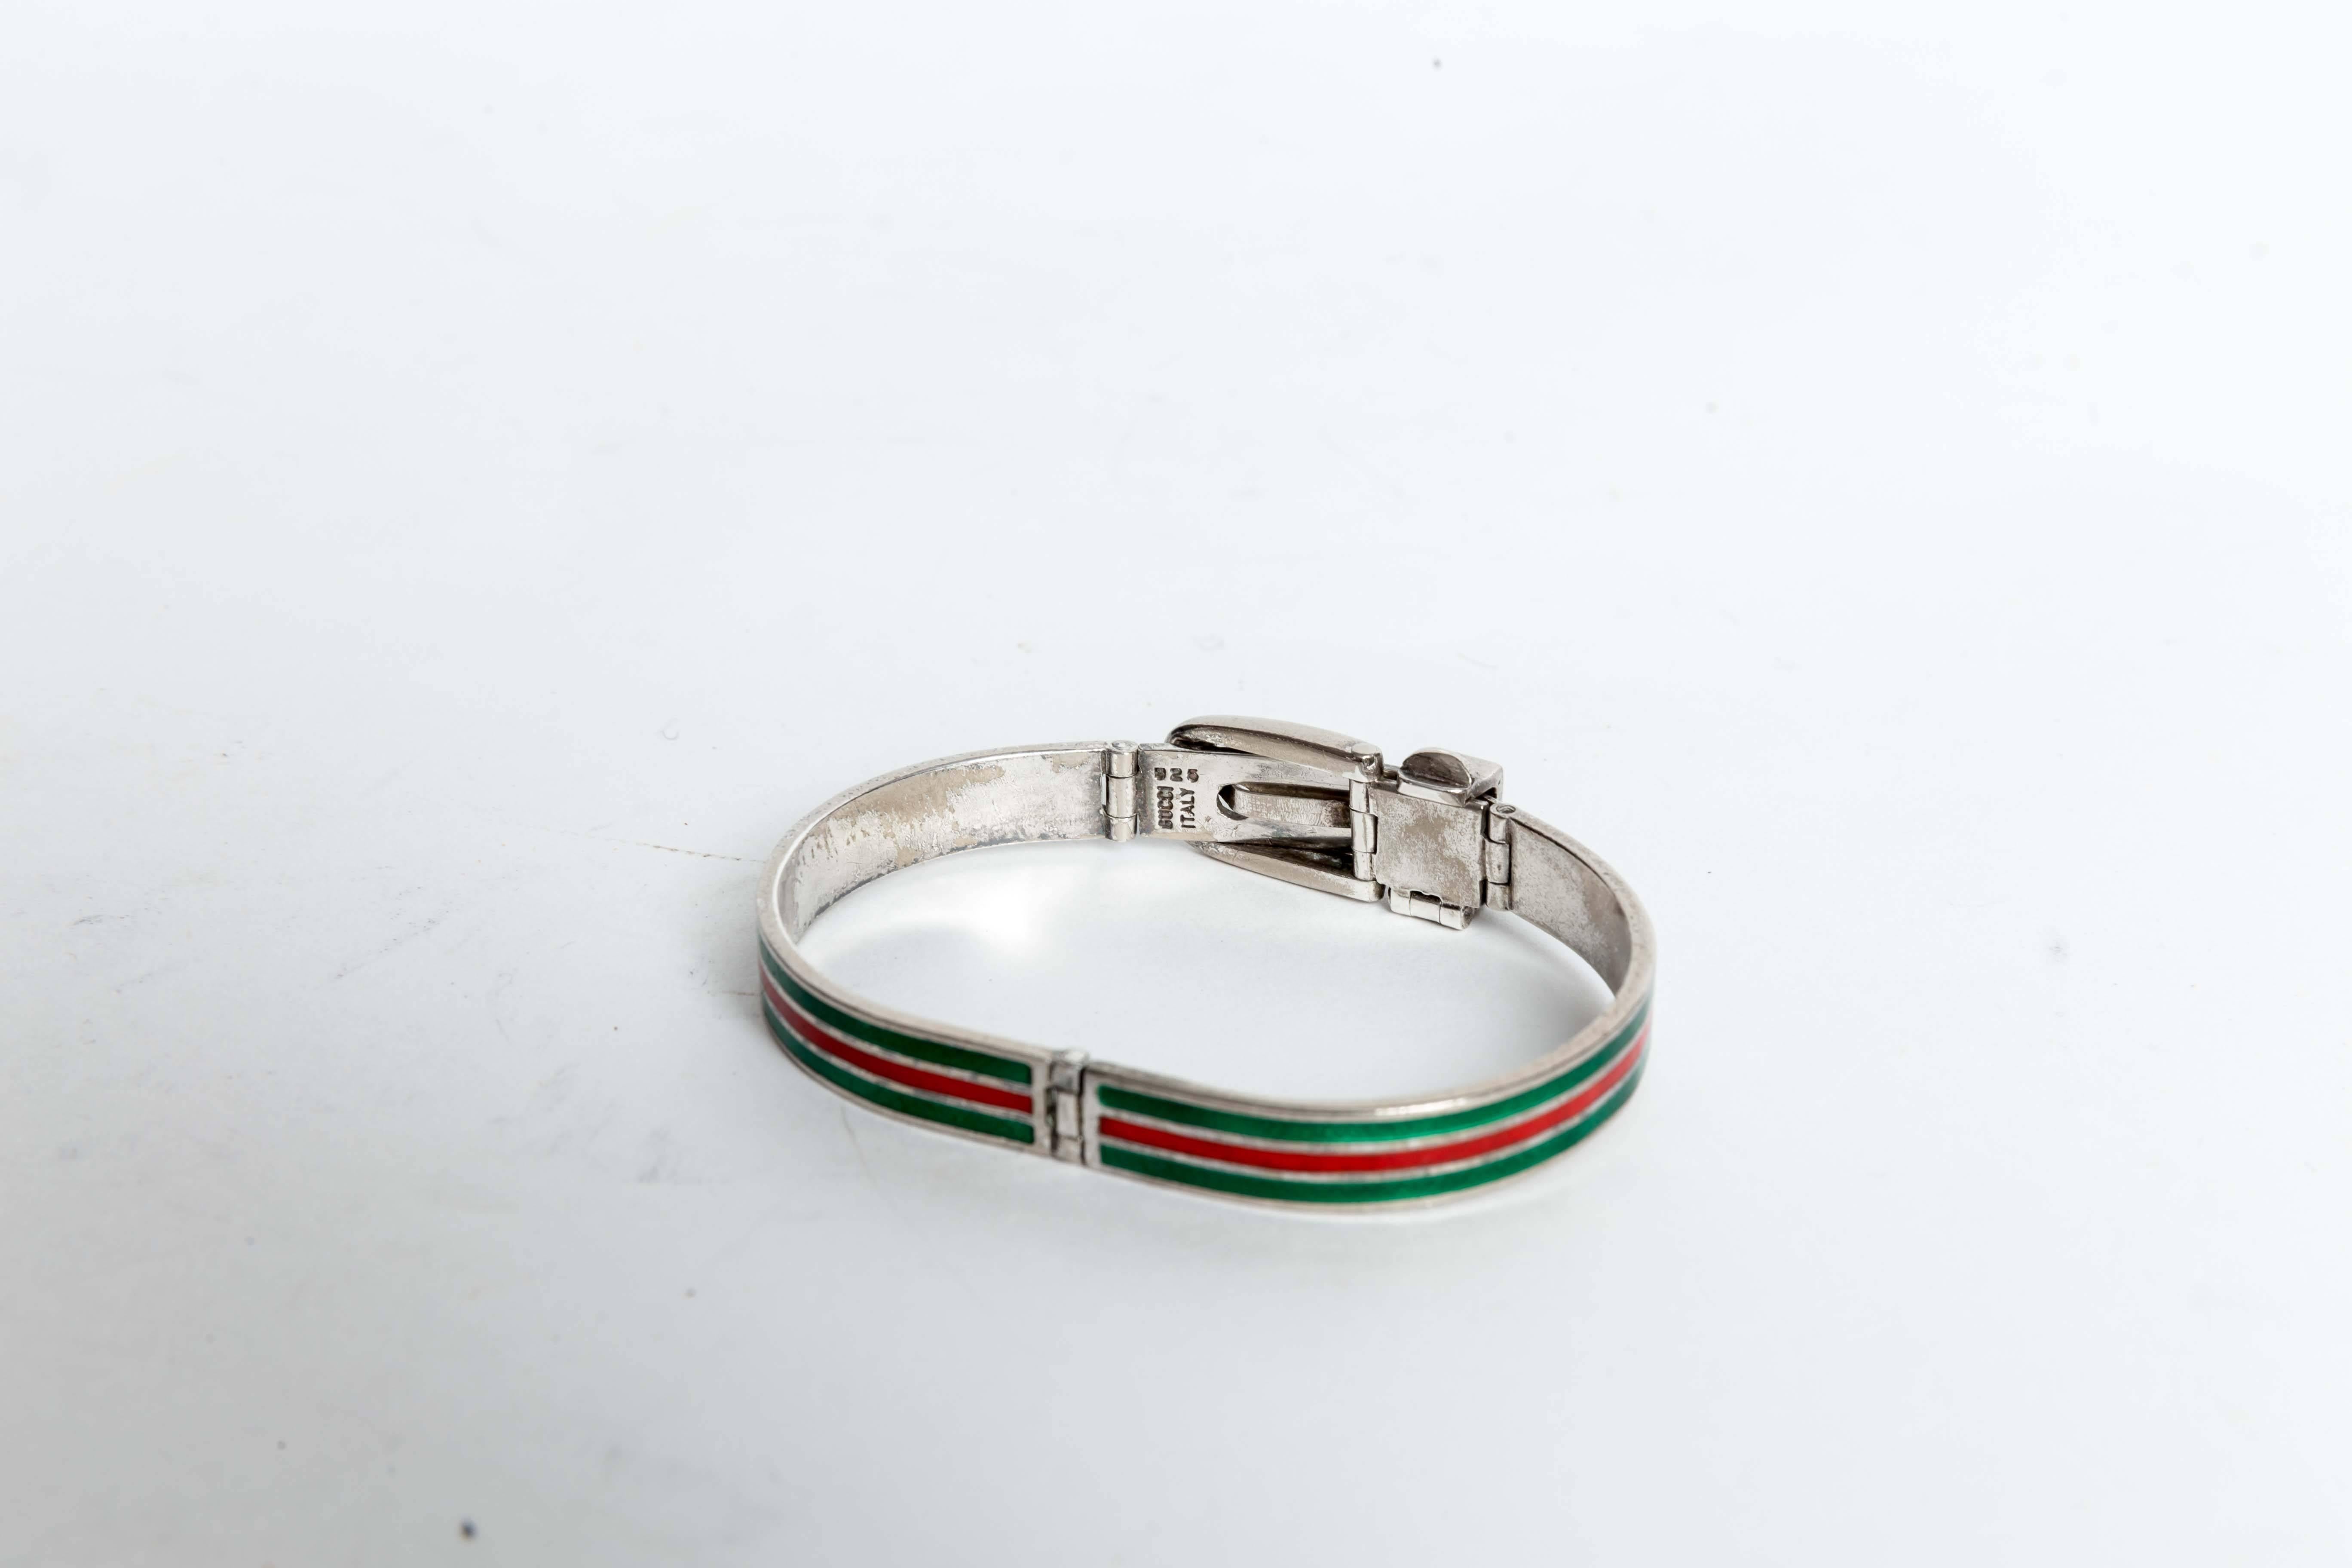 Gorgeous Vintage Gucci Sterling Silver Bracelet with one red and two green enamel stripes. Signed Gucci Italy 925, this bracelet measures 2 1/2 inches when closed. The design features a sterling belt buckle closure.